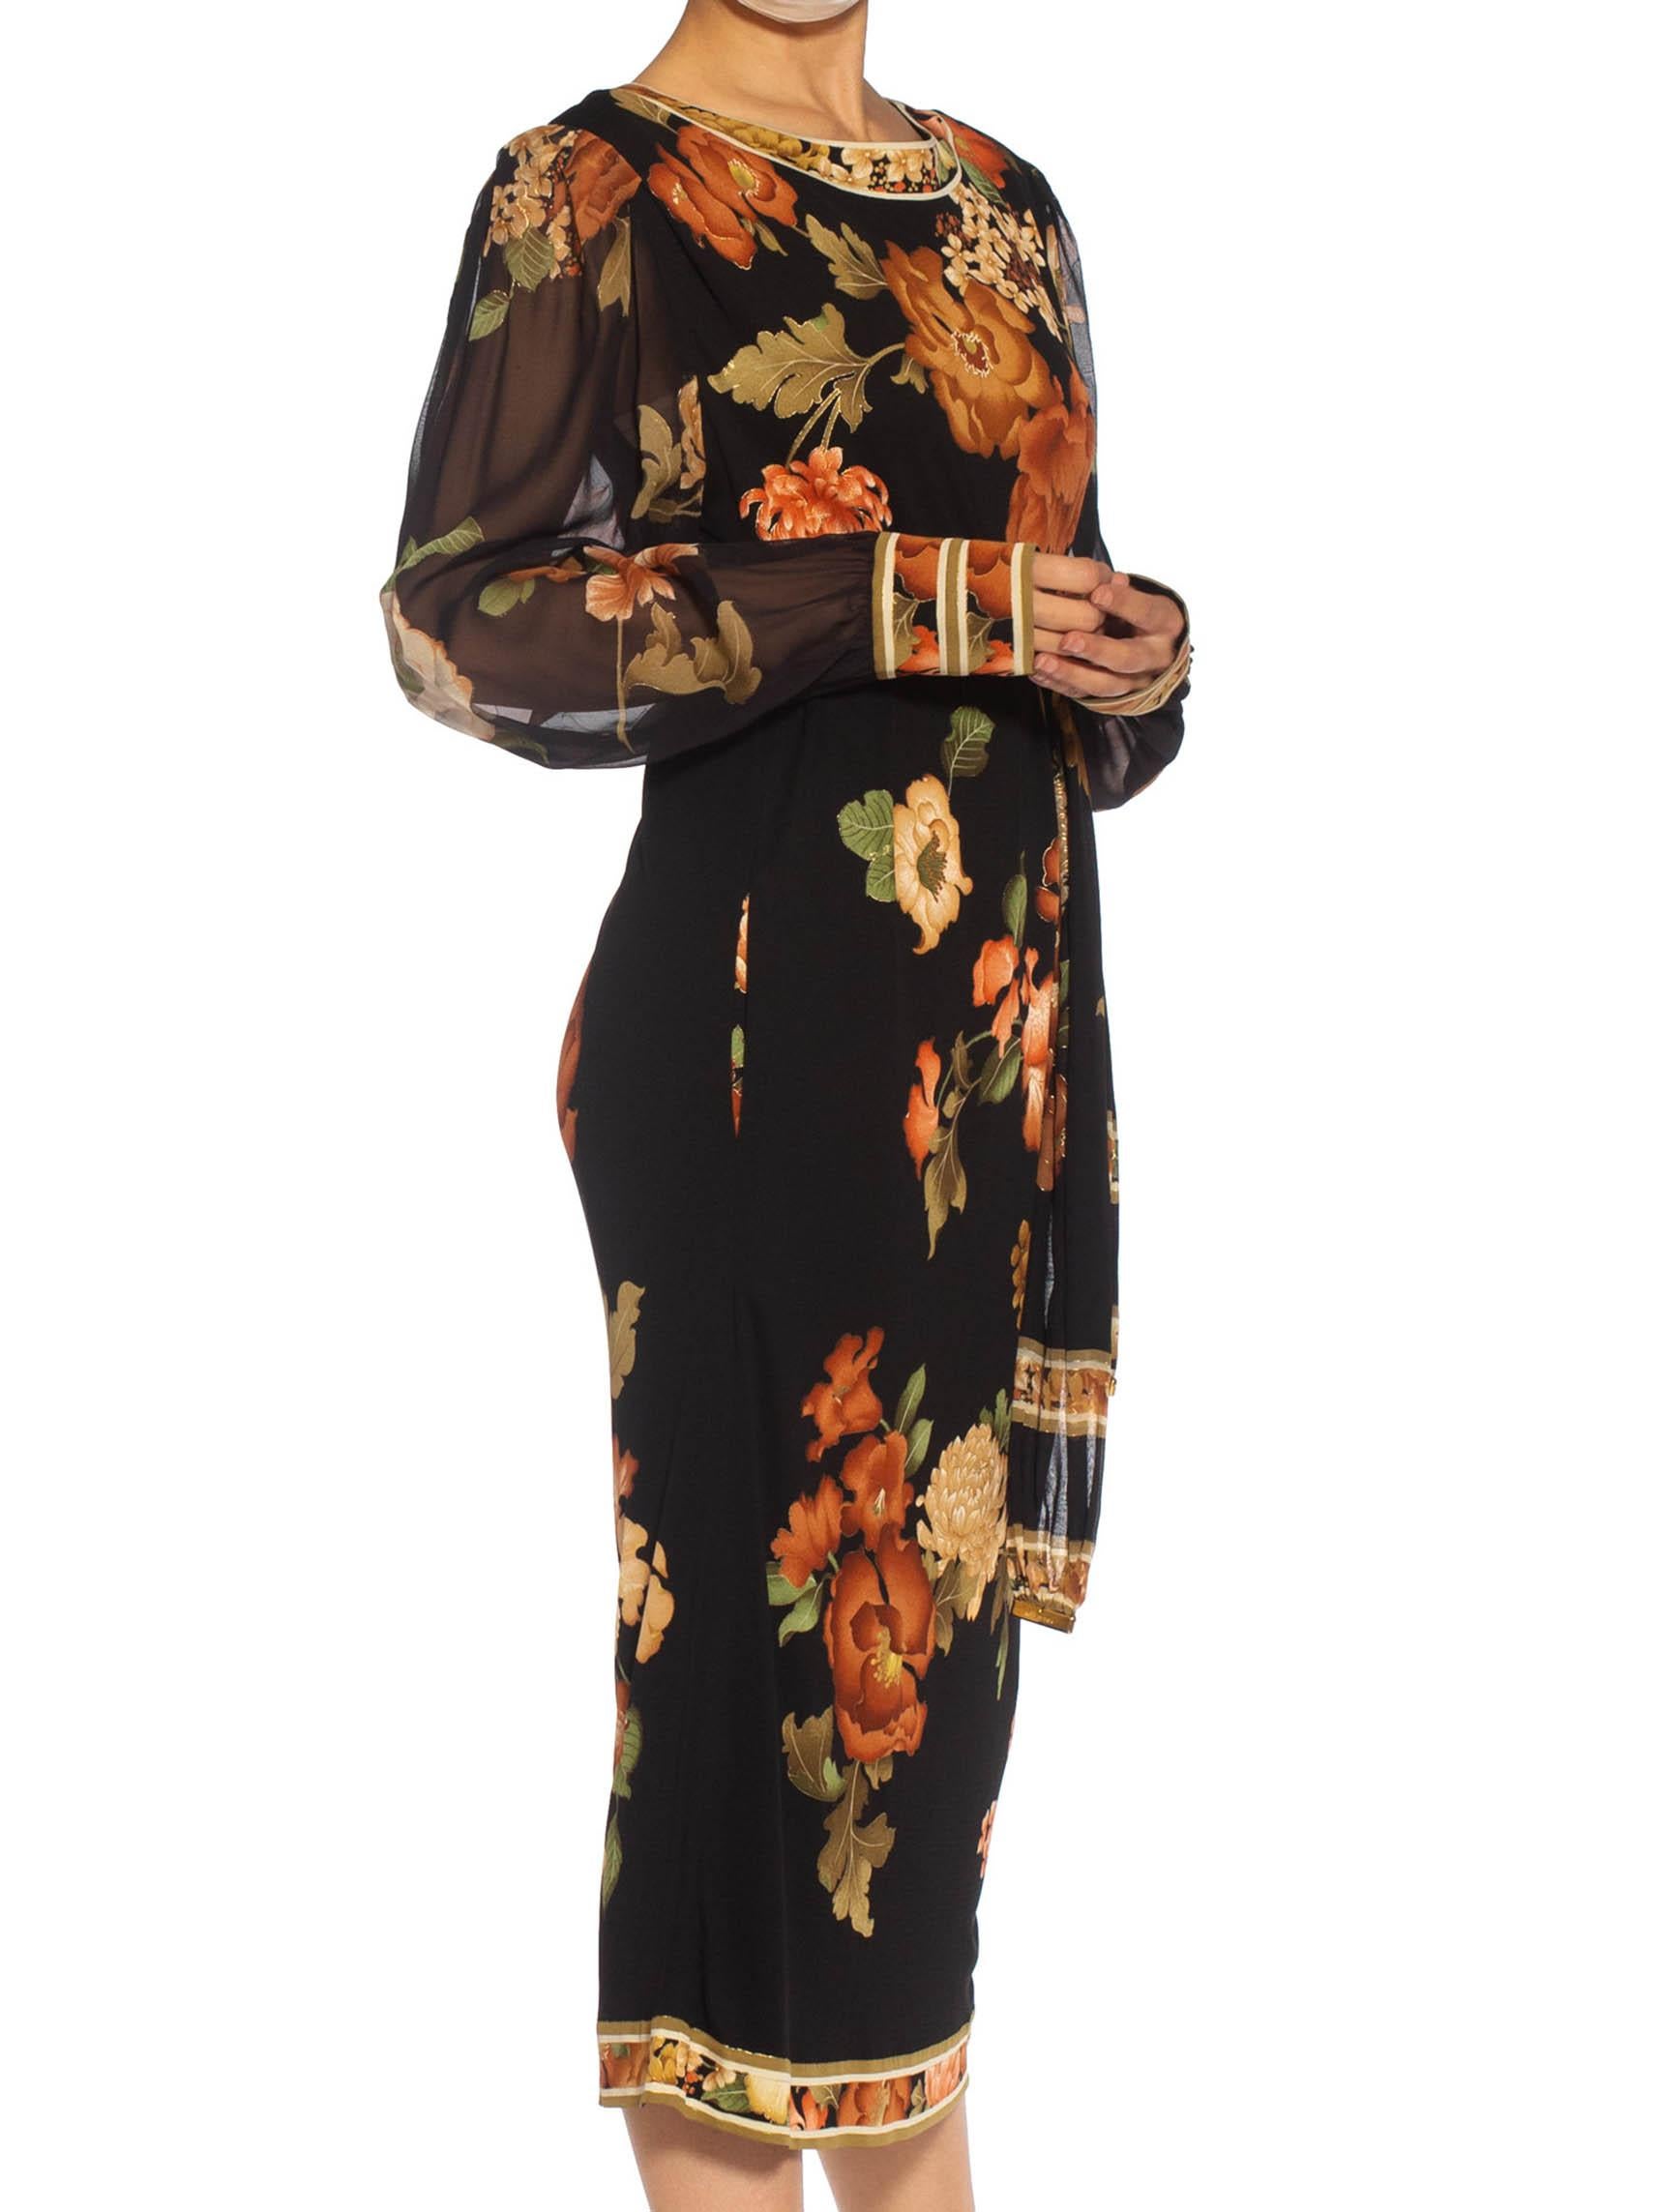 1980S LEONARD Black & Brown Silk Jersey Dress With Chiffon Sleeves Belt In Excellent Condition For Sale In New York, NY